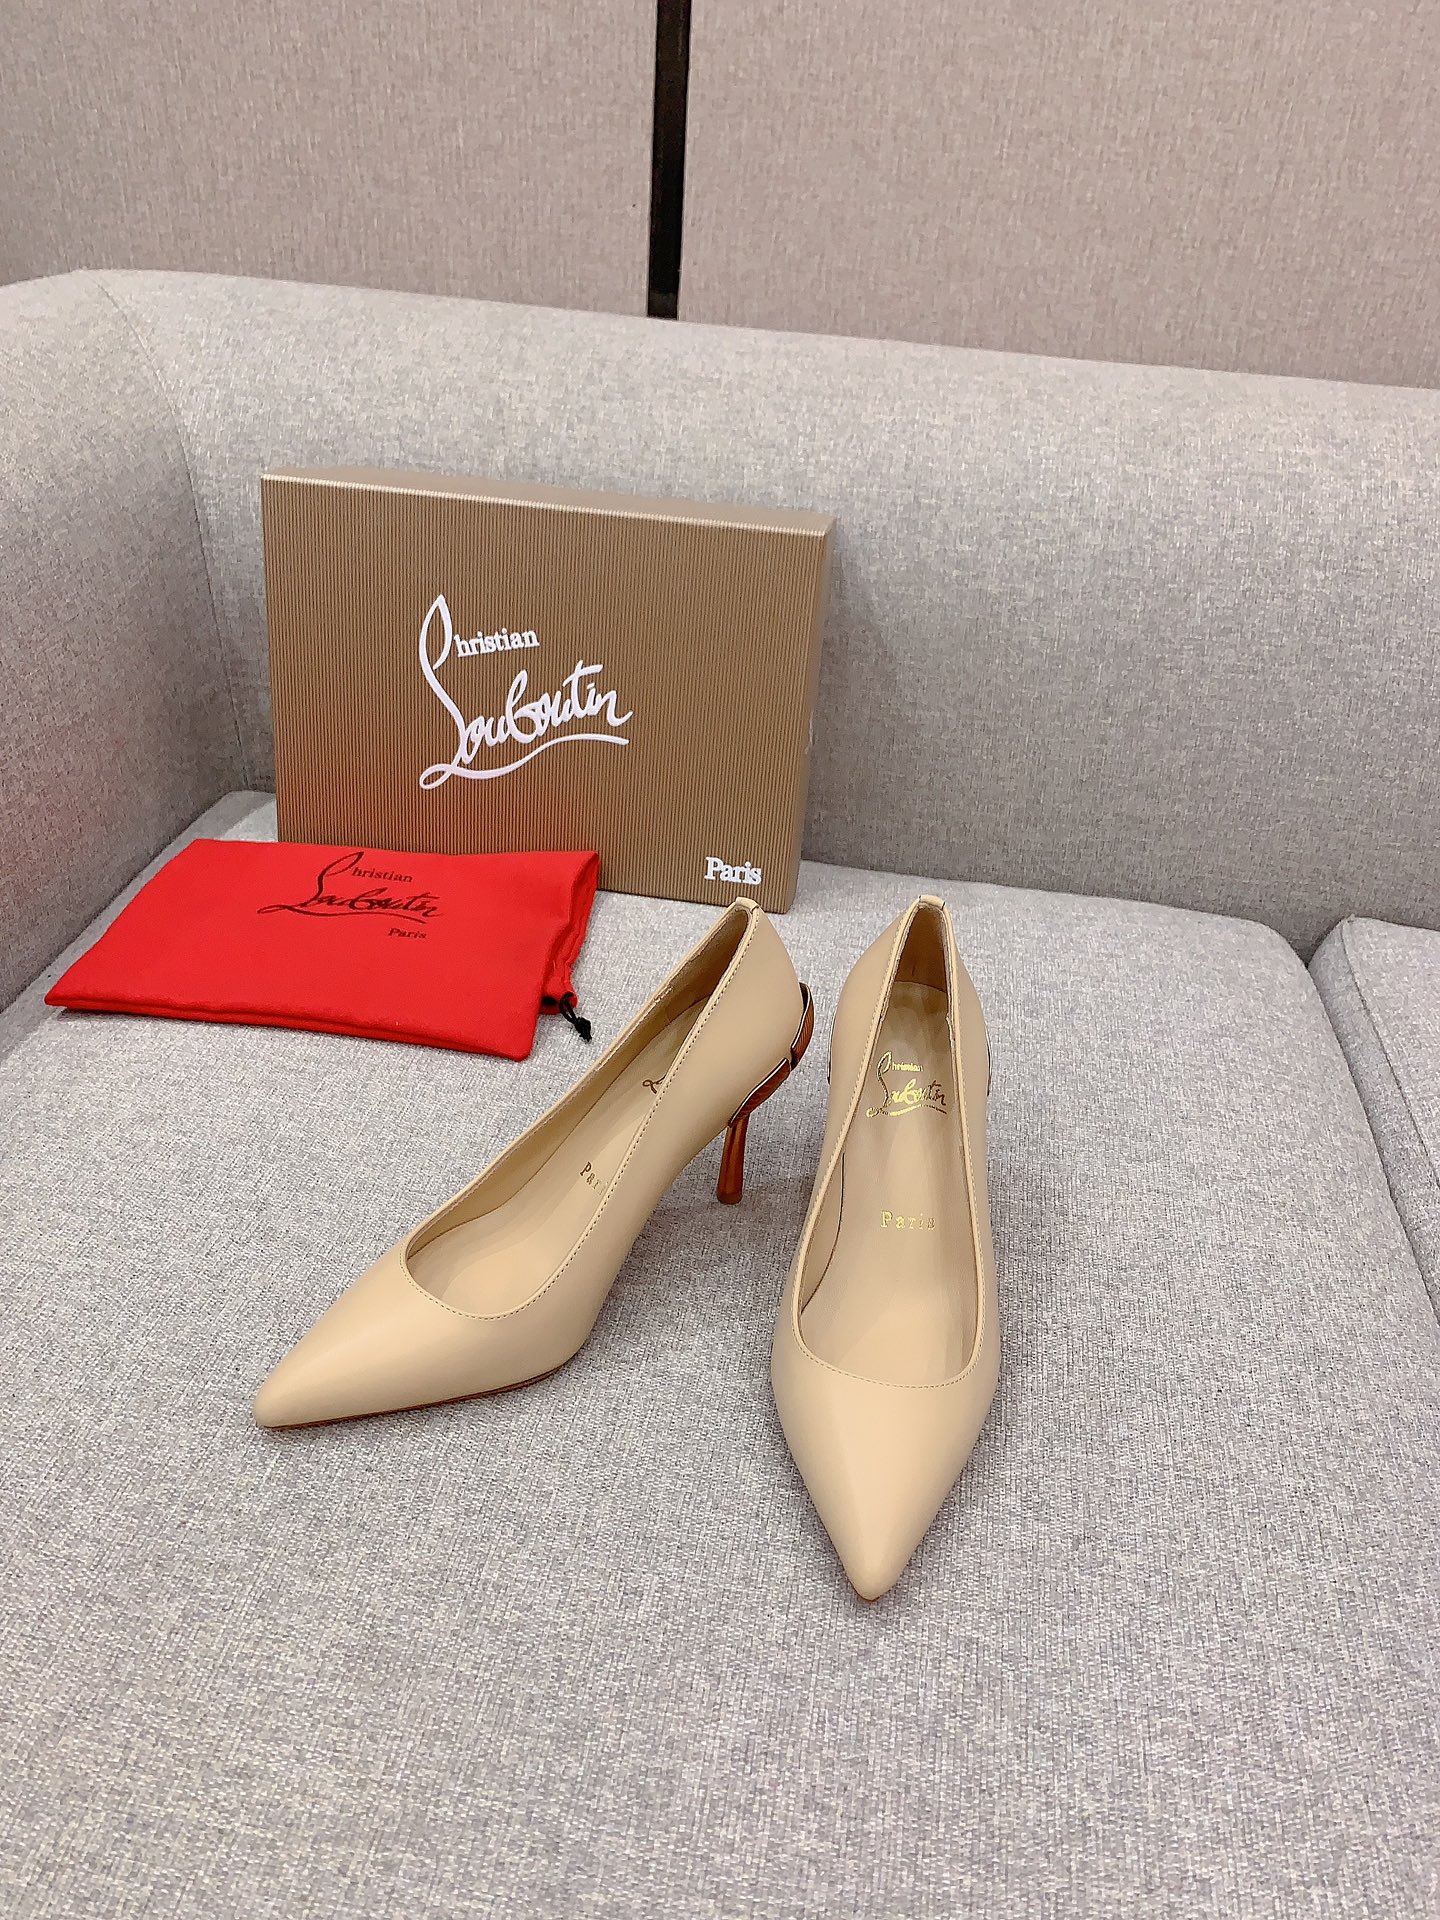 What’s the best to buy replica
 Christian Louboutin Shoes High Heel Pumps Red Genuine Leather Sheepskin